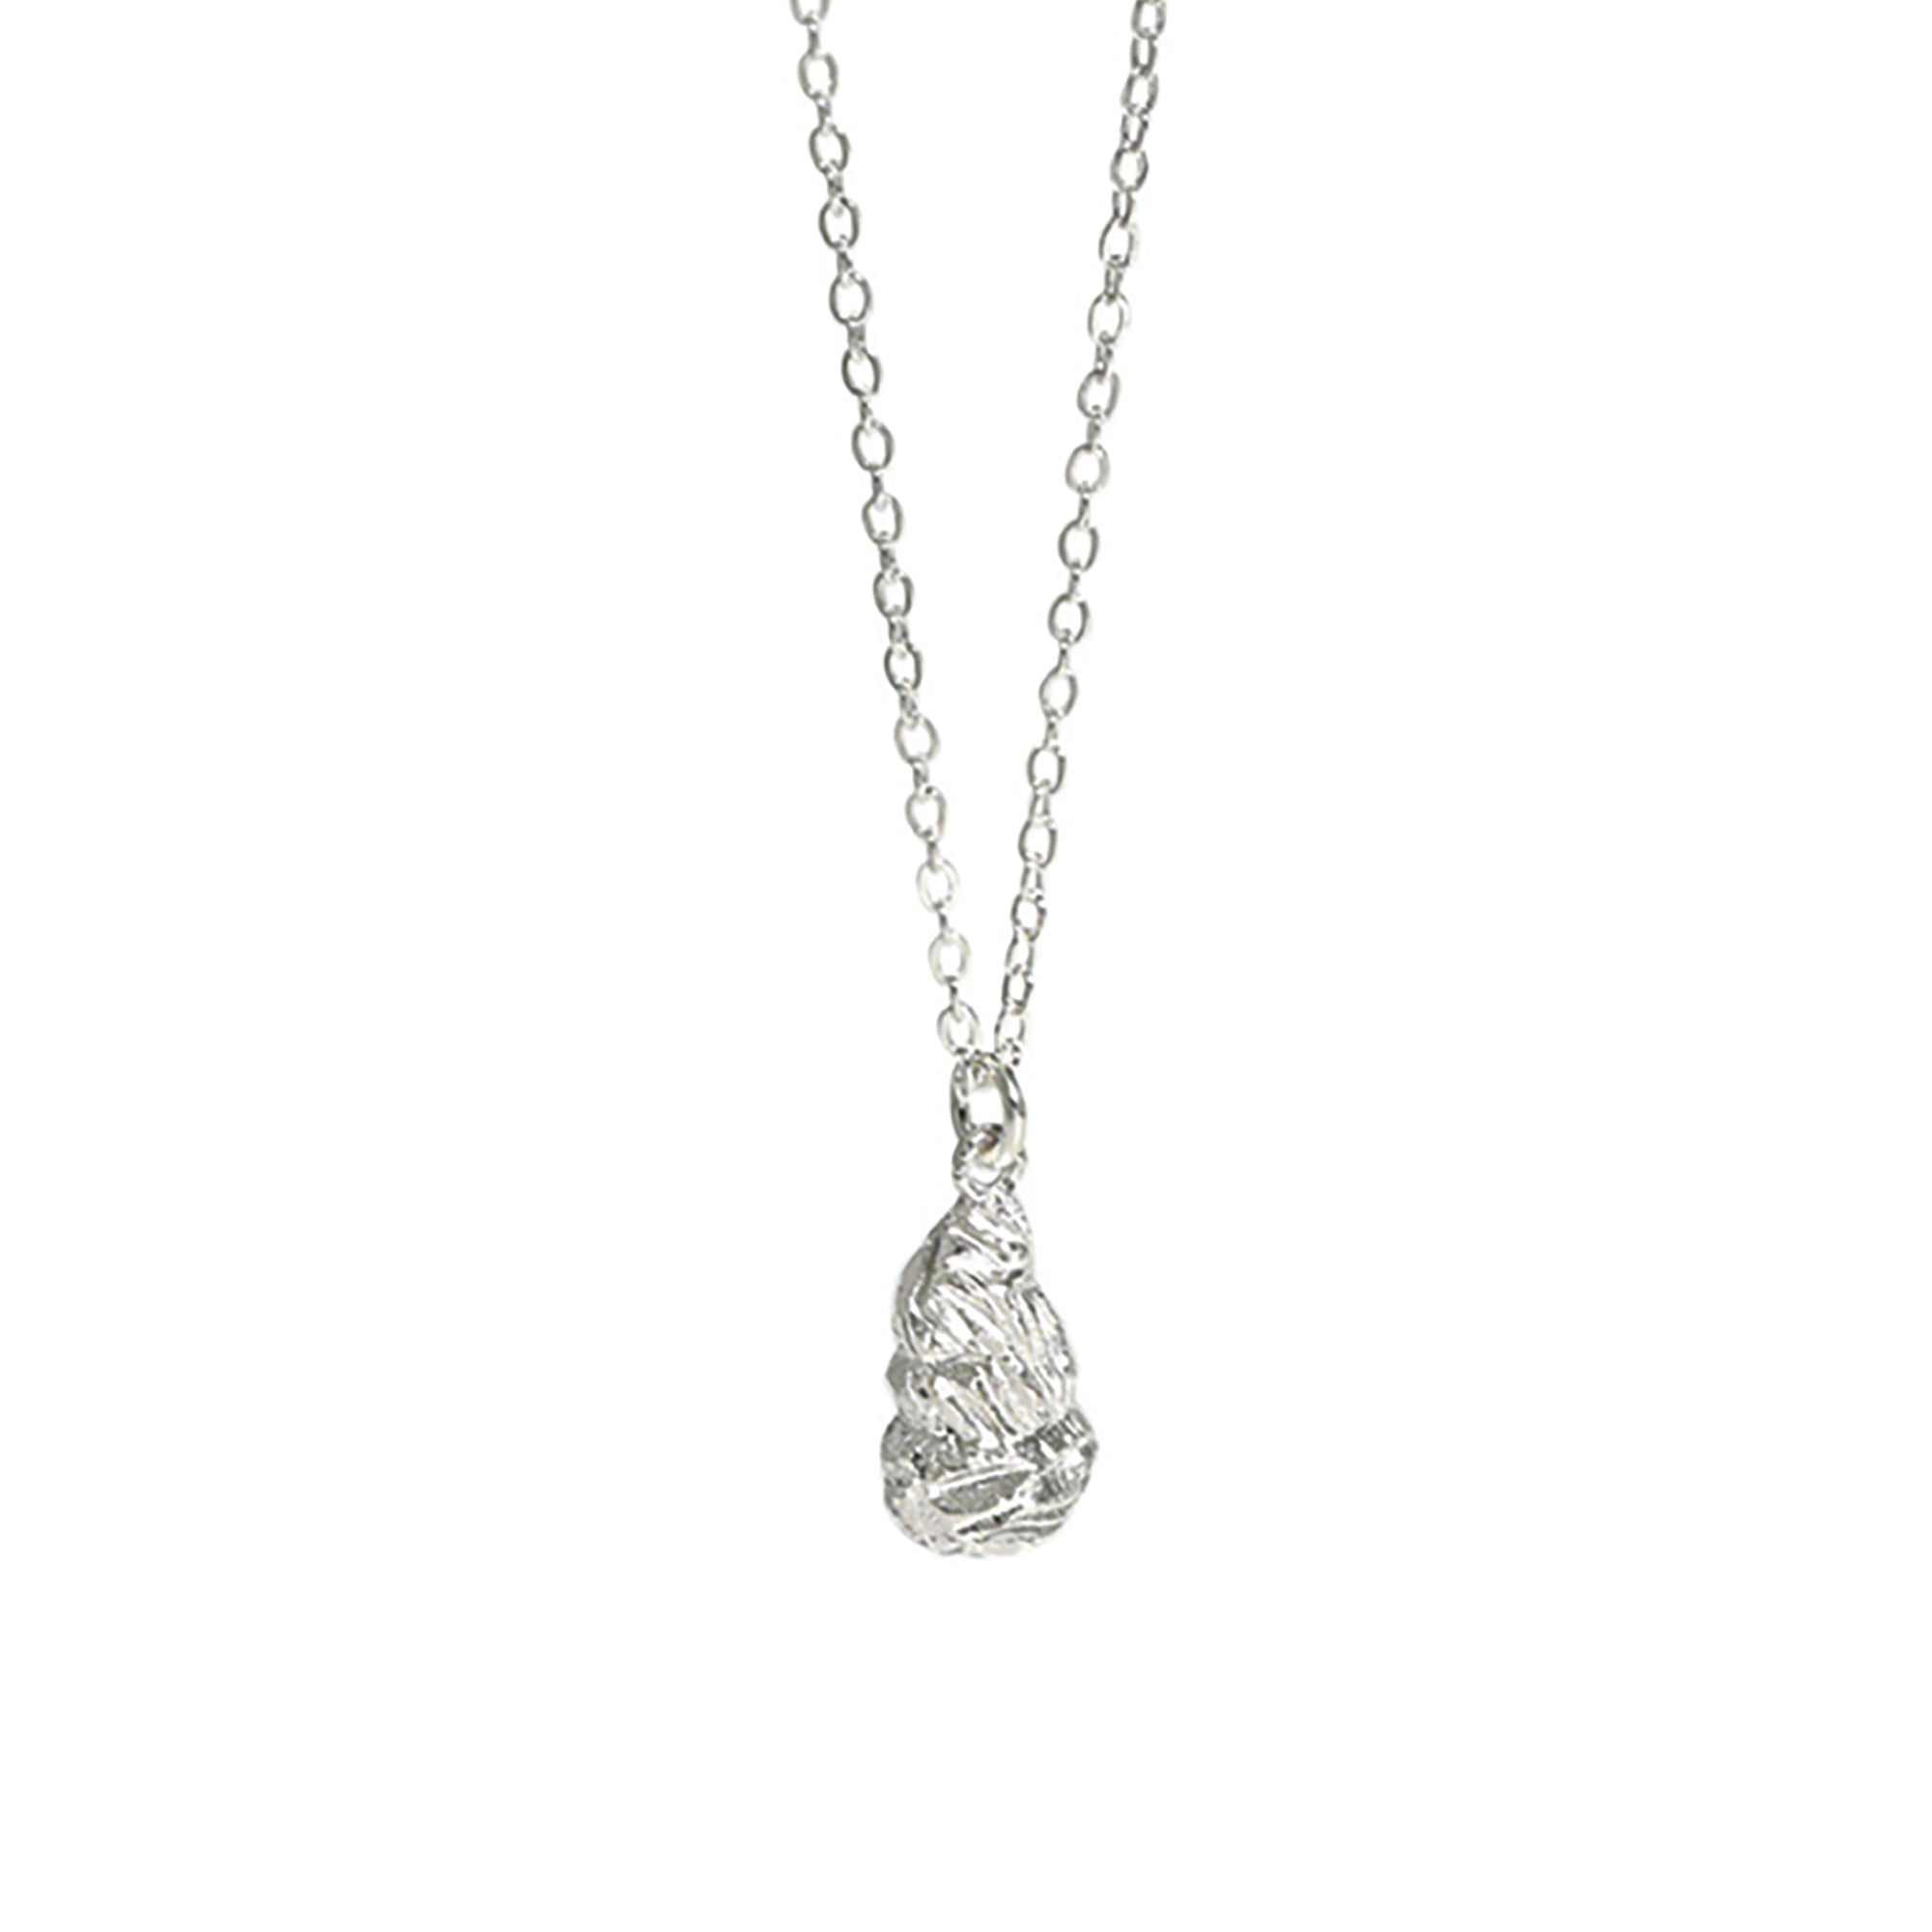 A sterling silver necklace with a dainty chain and hanging teardrop nugget which has a rocky texture.